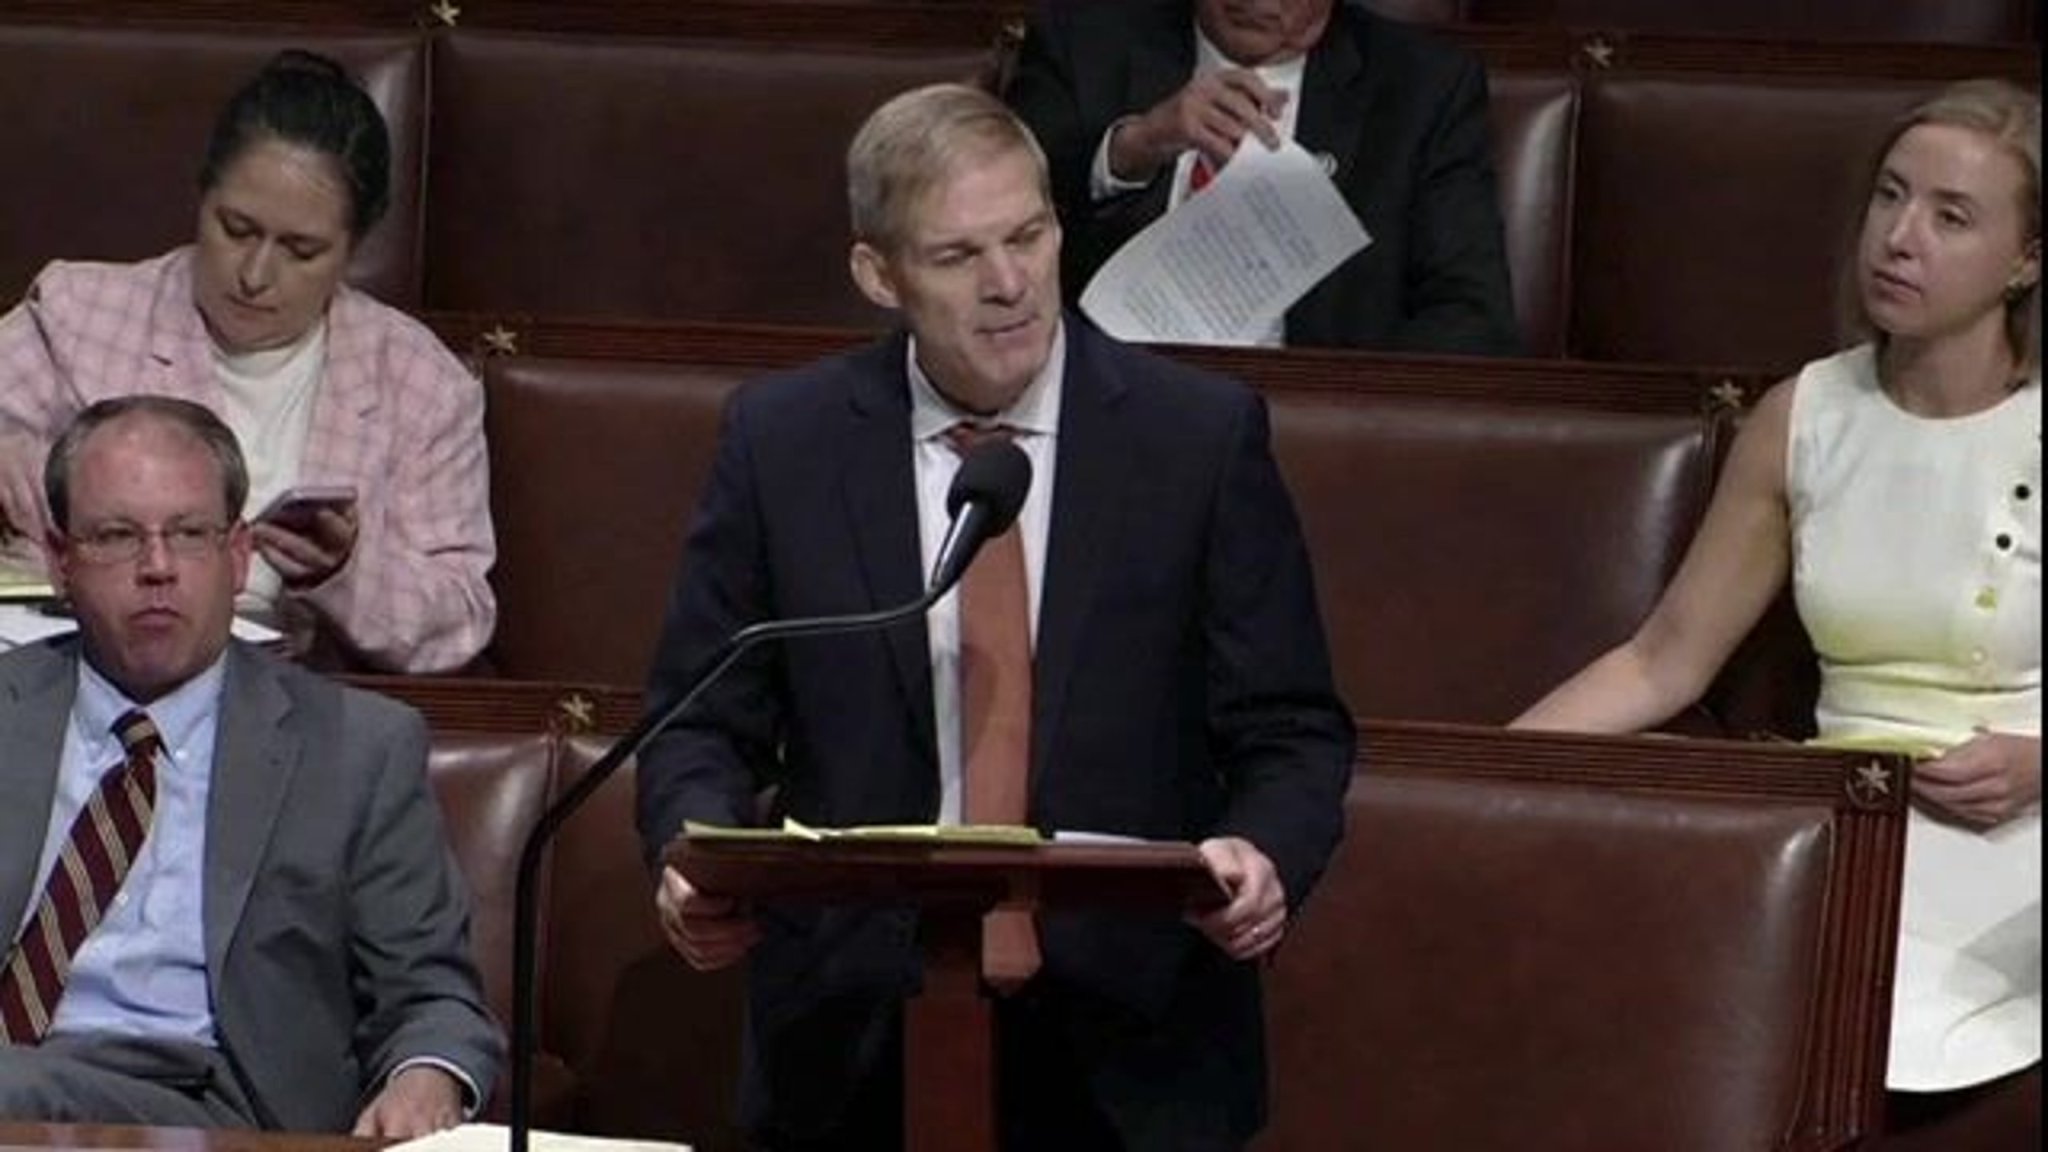 Rep. Jim Jordan (R-OH) met with cheers of “Amen” from House Republicans as he celebrates Roe v. Wade being overturned.